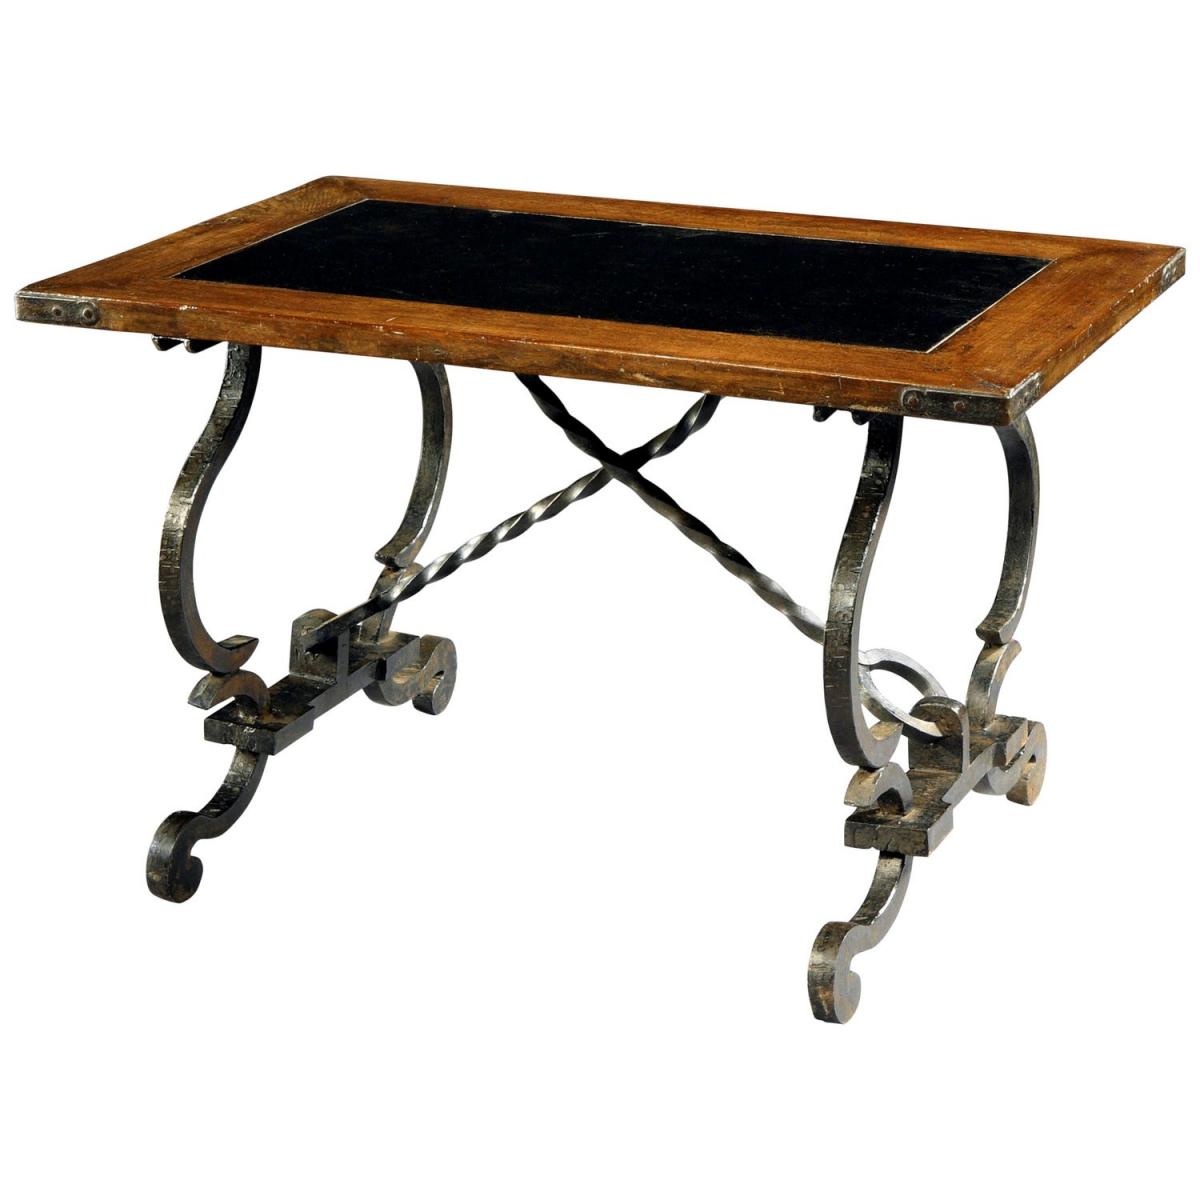 An 18th century, oak top with slate inset united with a contemporary, Spanish influenced low iron base